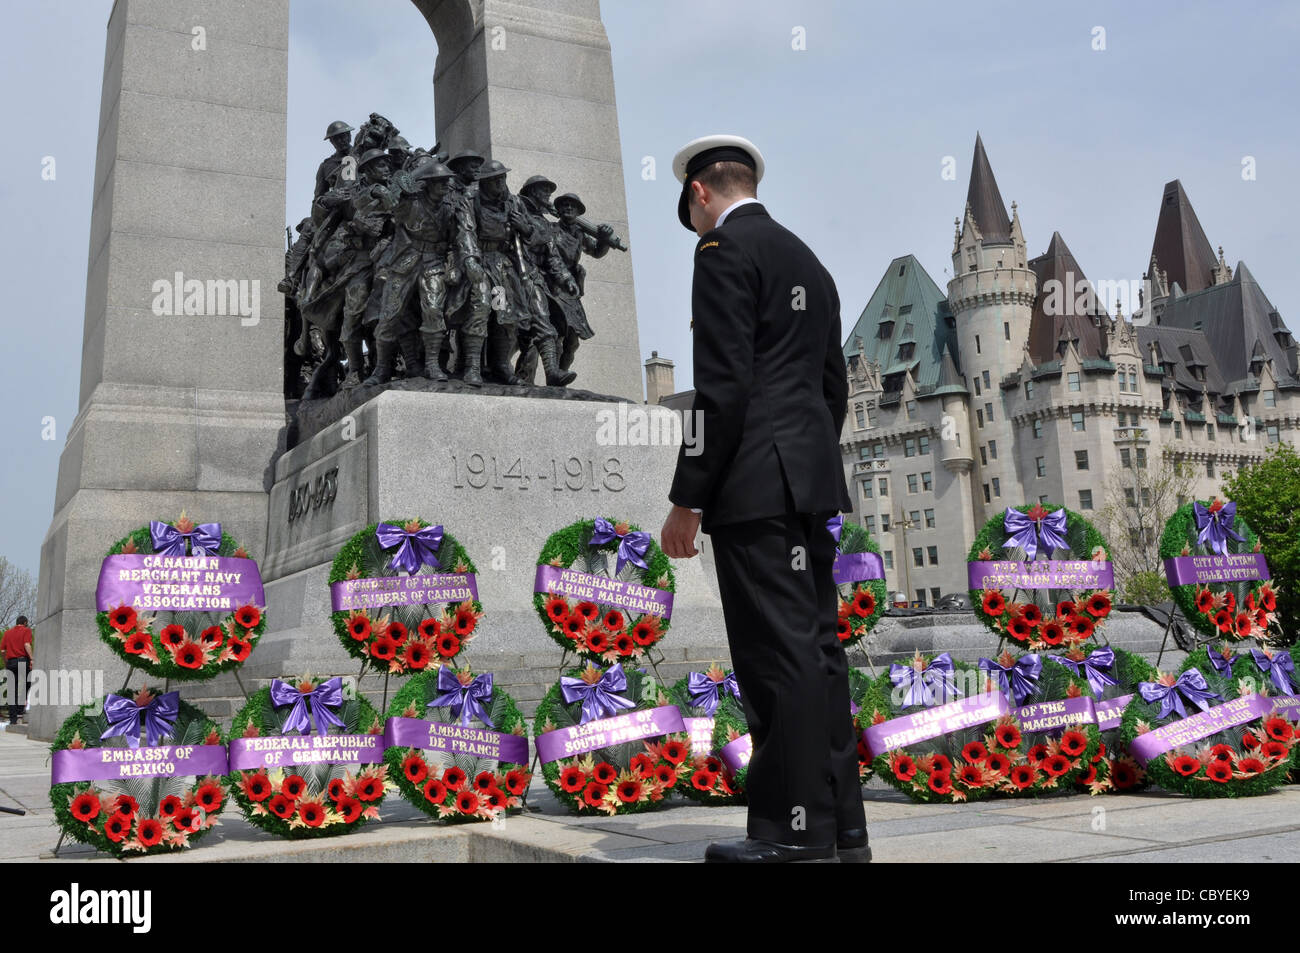 A commemorative service is held to mark the anniversary of the Battle of the Atlantic at the Cenotaph War Memorial. May 2, 2010 Stock Photo